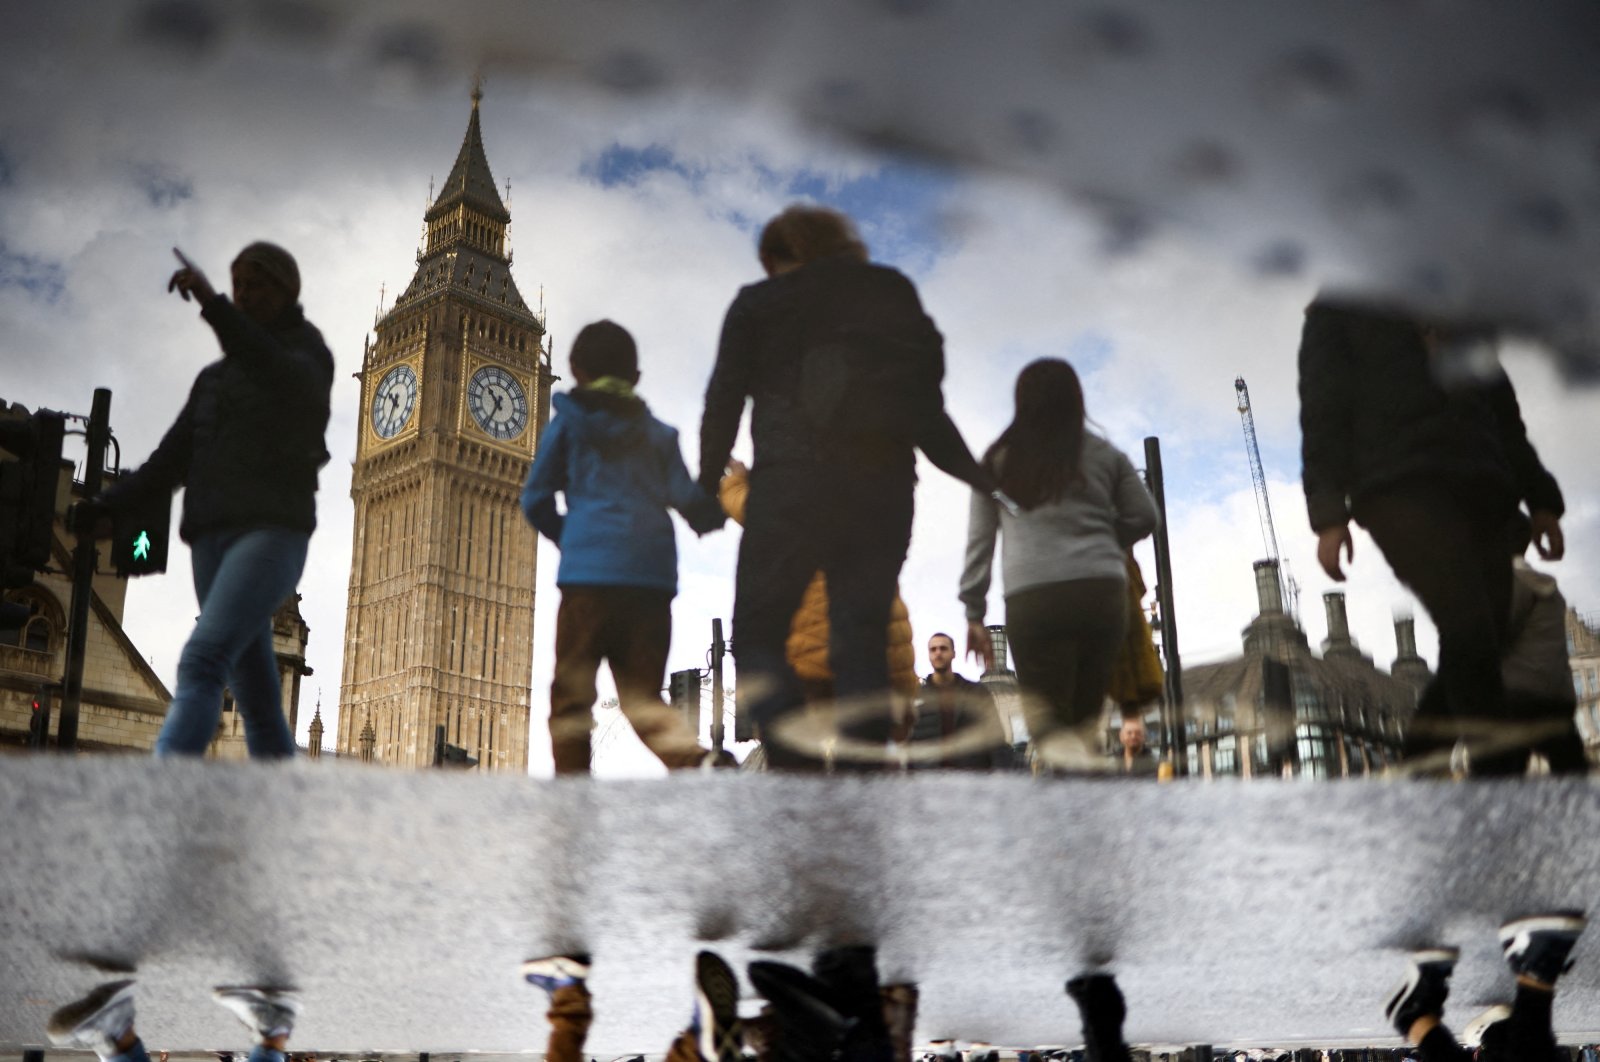 The Elizabeth Tower, more commonly known as Big Ben, is seen reflected in a puddle as people walk outside the Houses of Parliament in London, U.K., Oct. 23, 2022. (Reuters Photo)